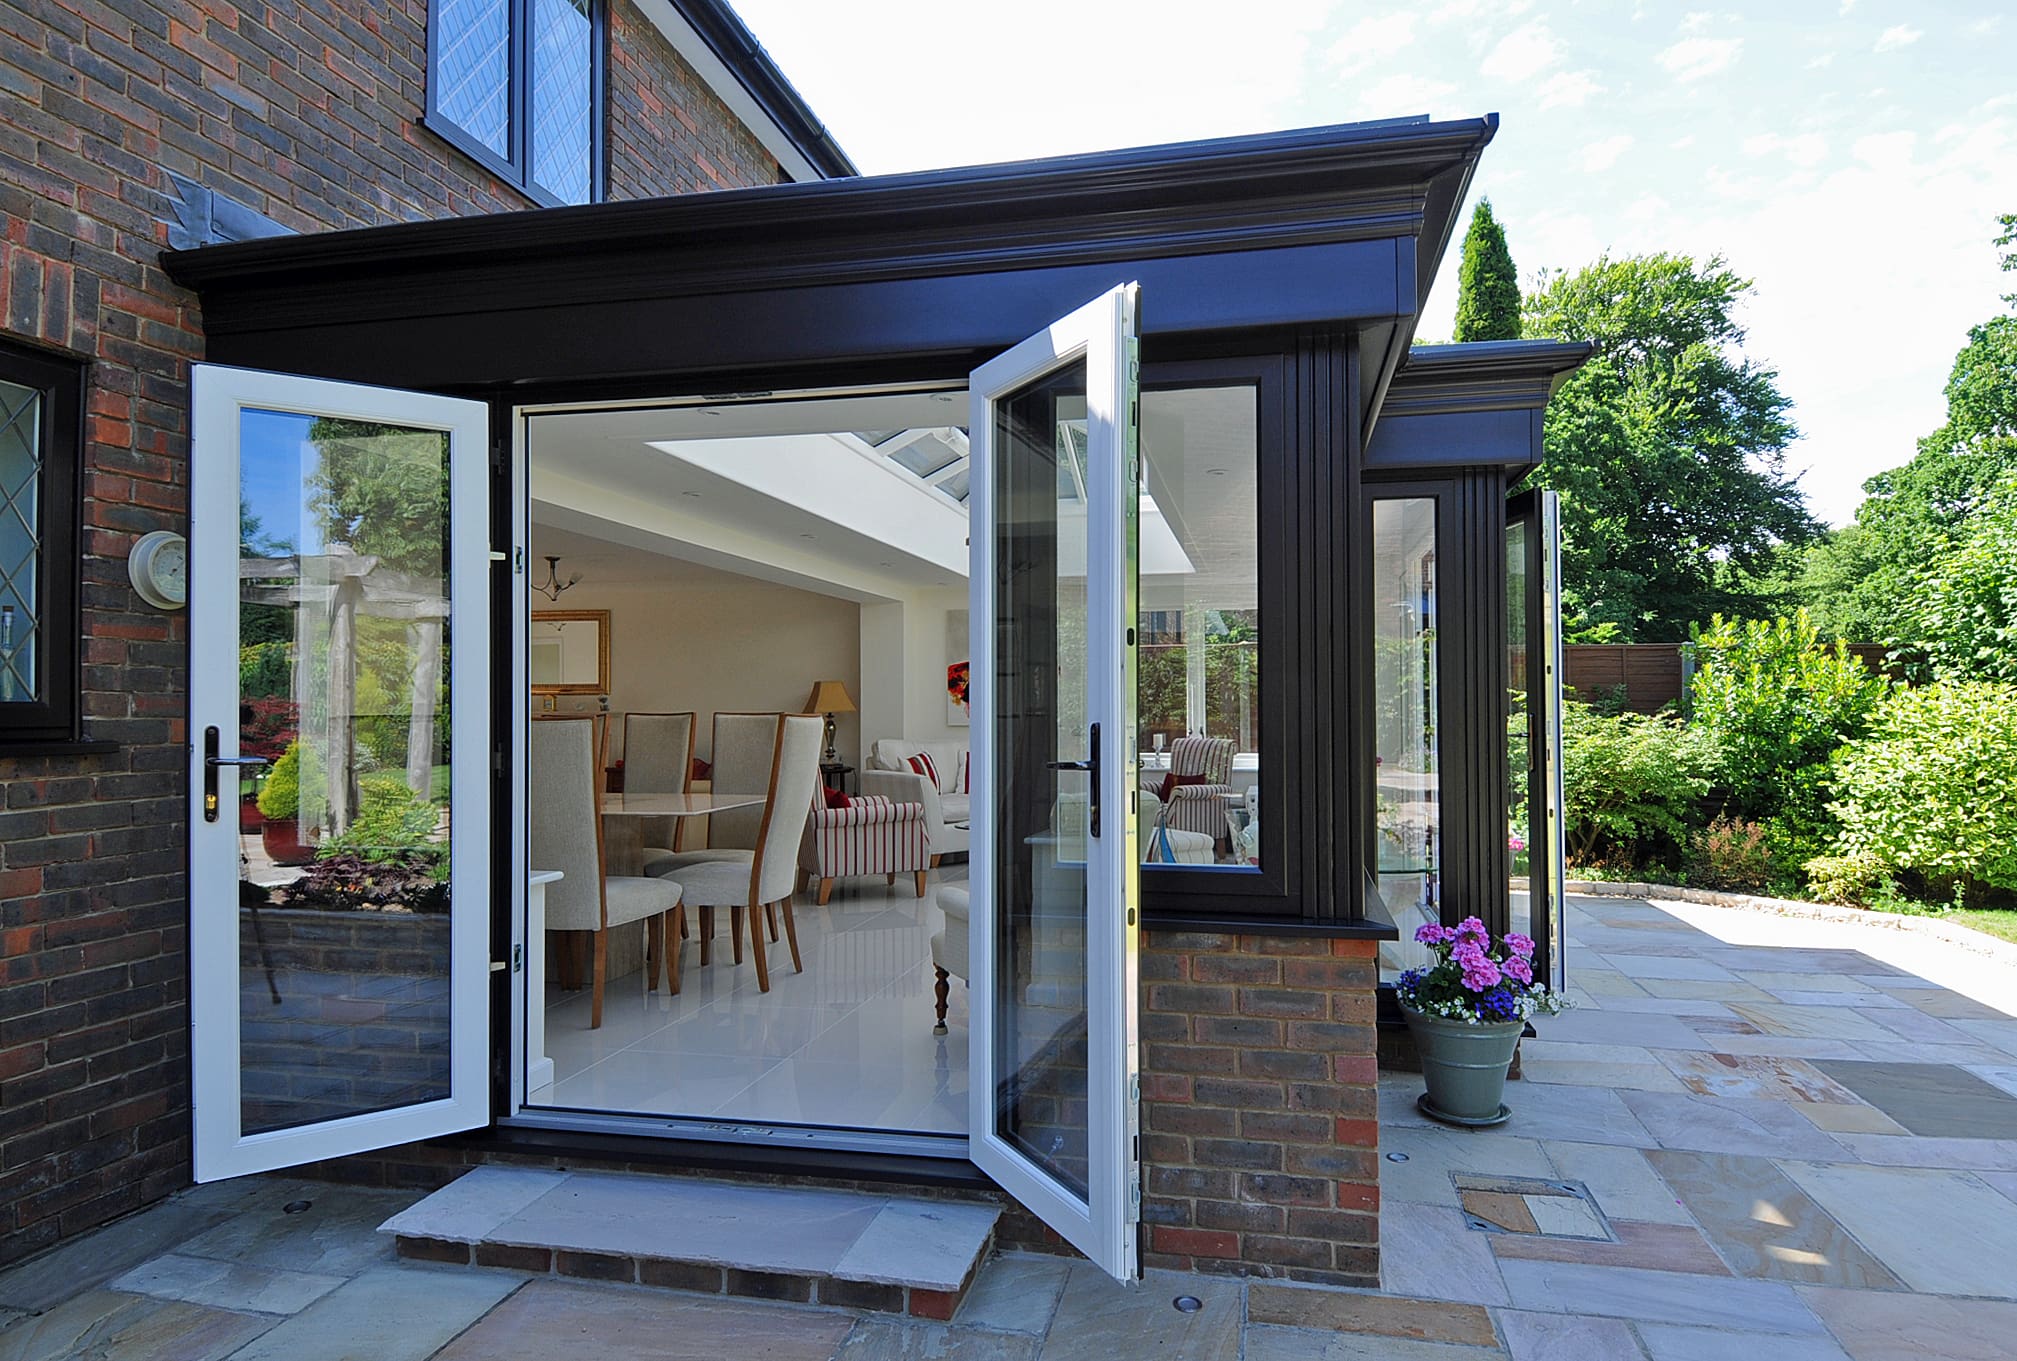 Side view of a kitchen extension with the french doors open and a view into the living area.